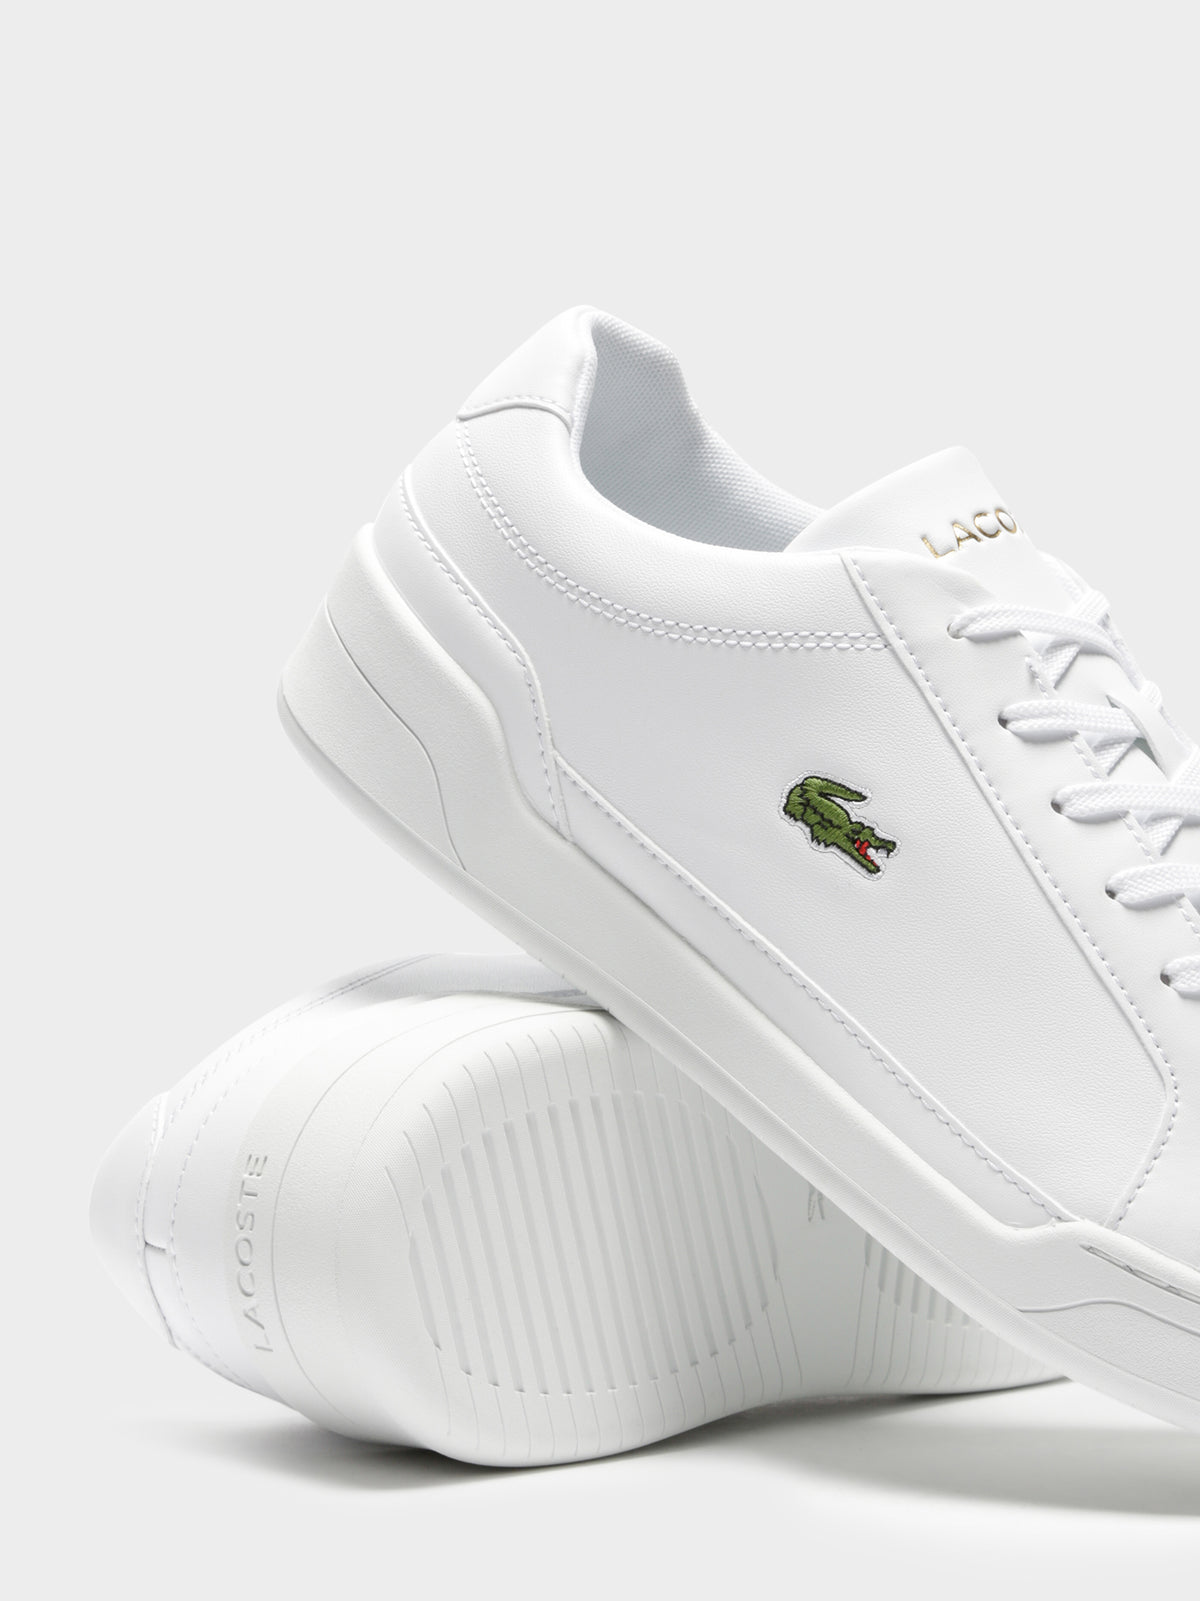 Mens Challenge 319 5 SFA Leather Sneaker in White